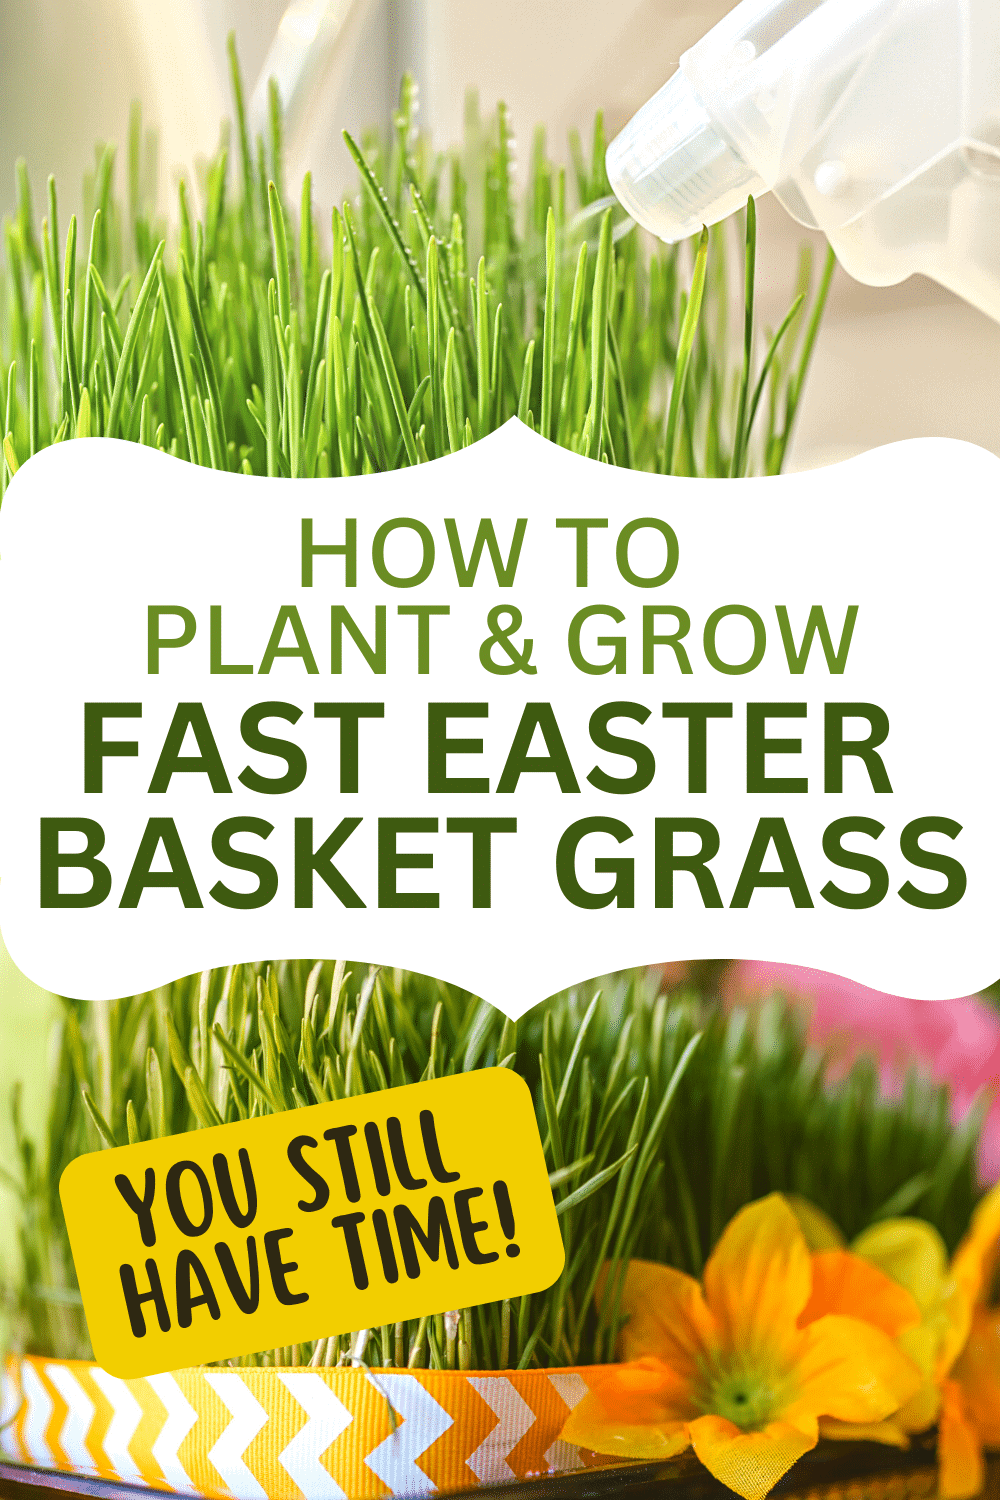 How To Plant Easter Grass EASTER BASKET GRASS MISTED WITH WATER BOTTLE WITH TEXT THEN EASTER BASKET WITH REAL GRASS AT THE BOTTOM